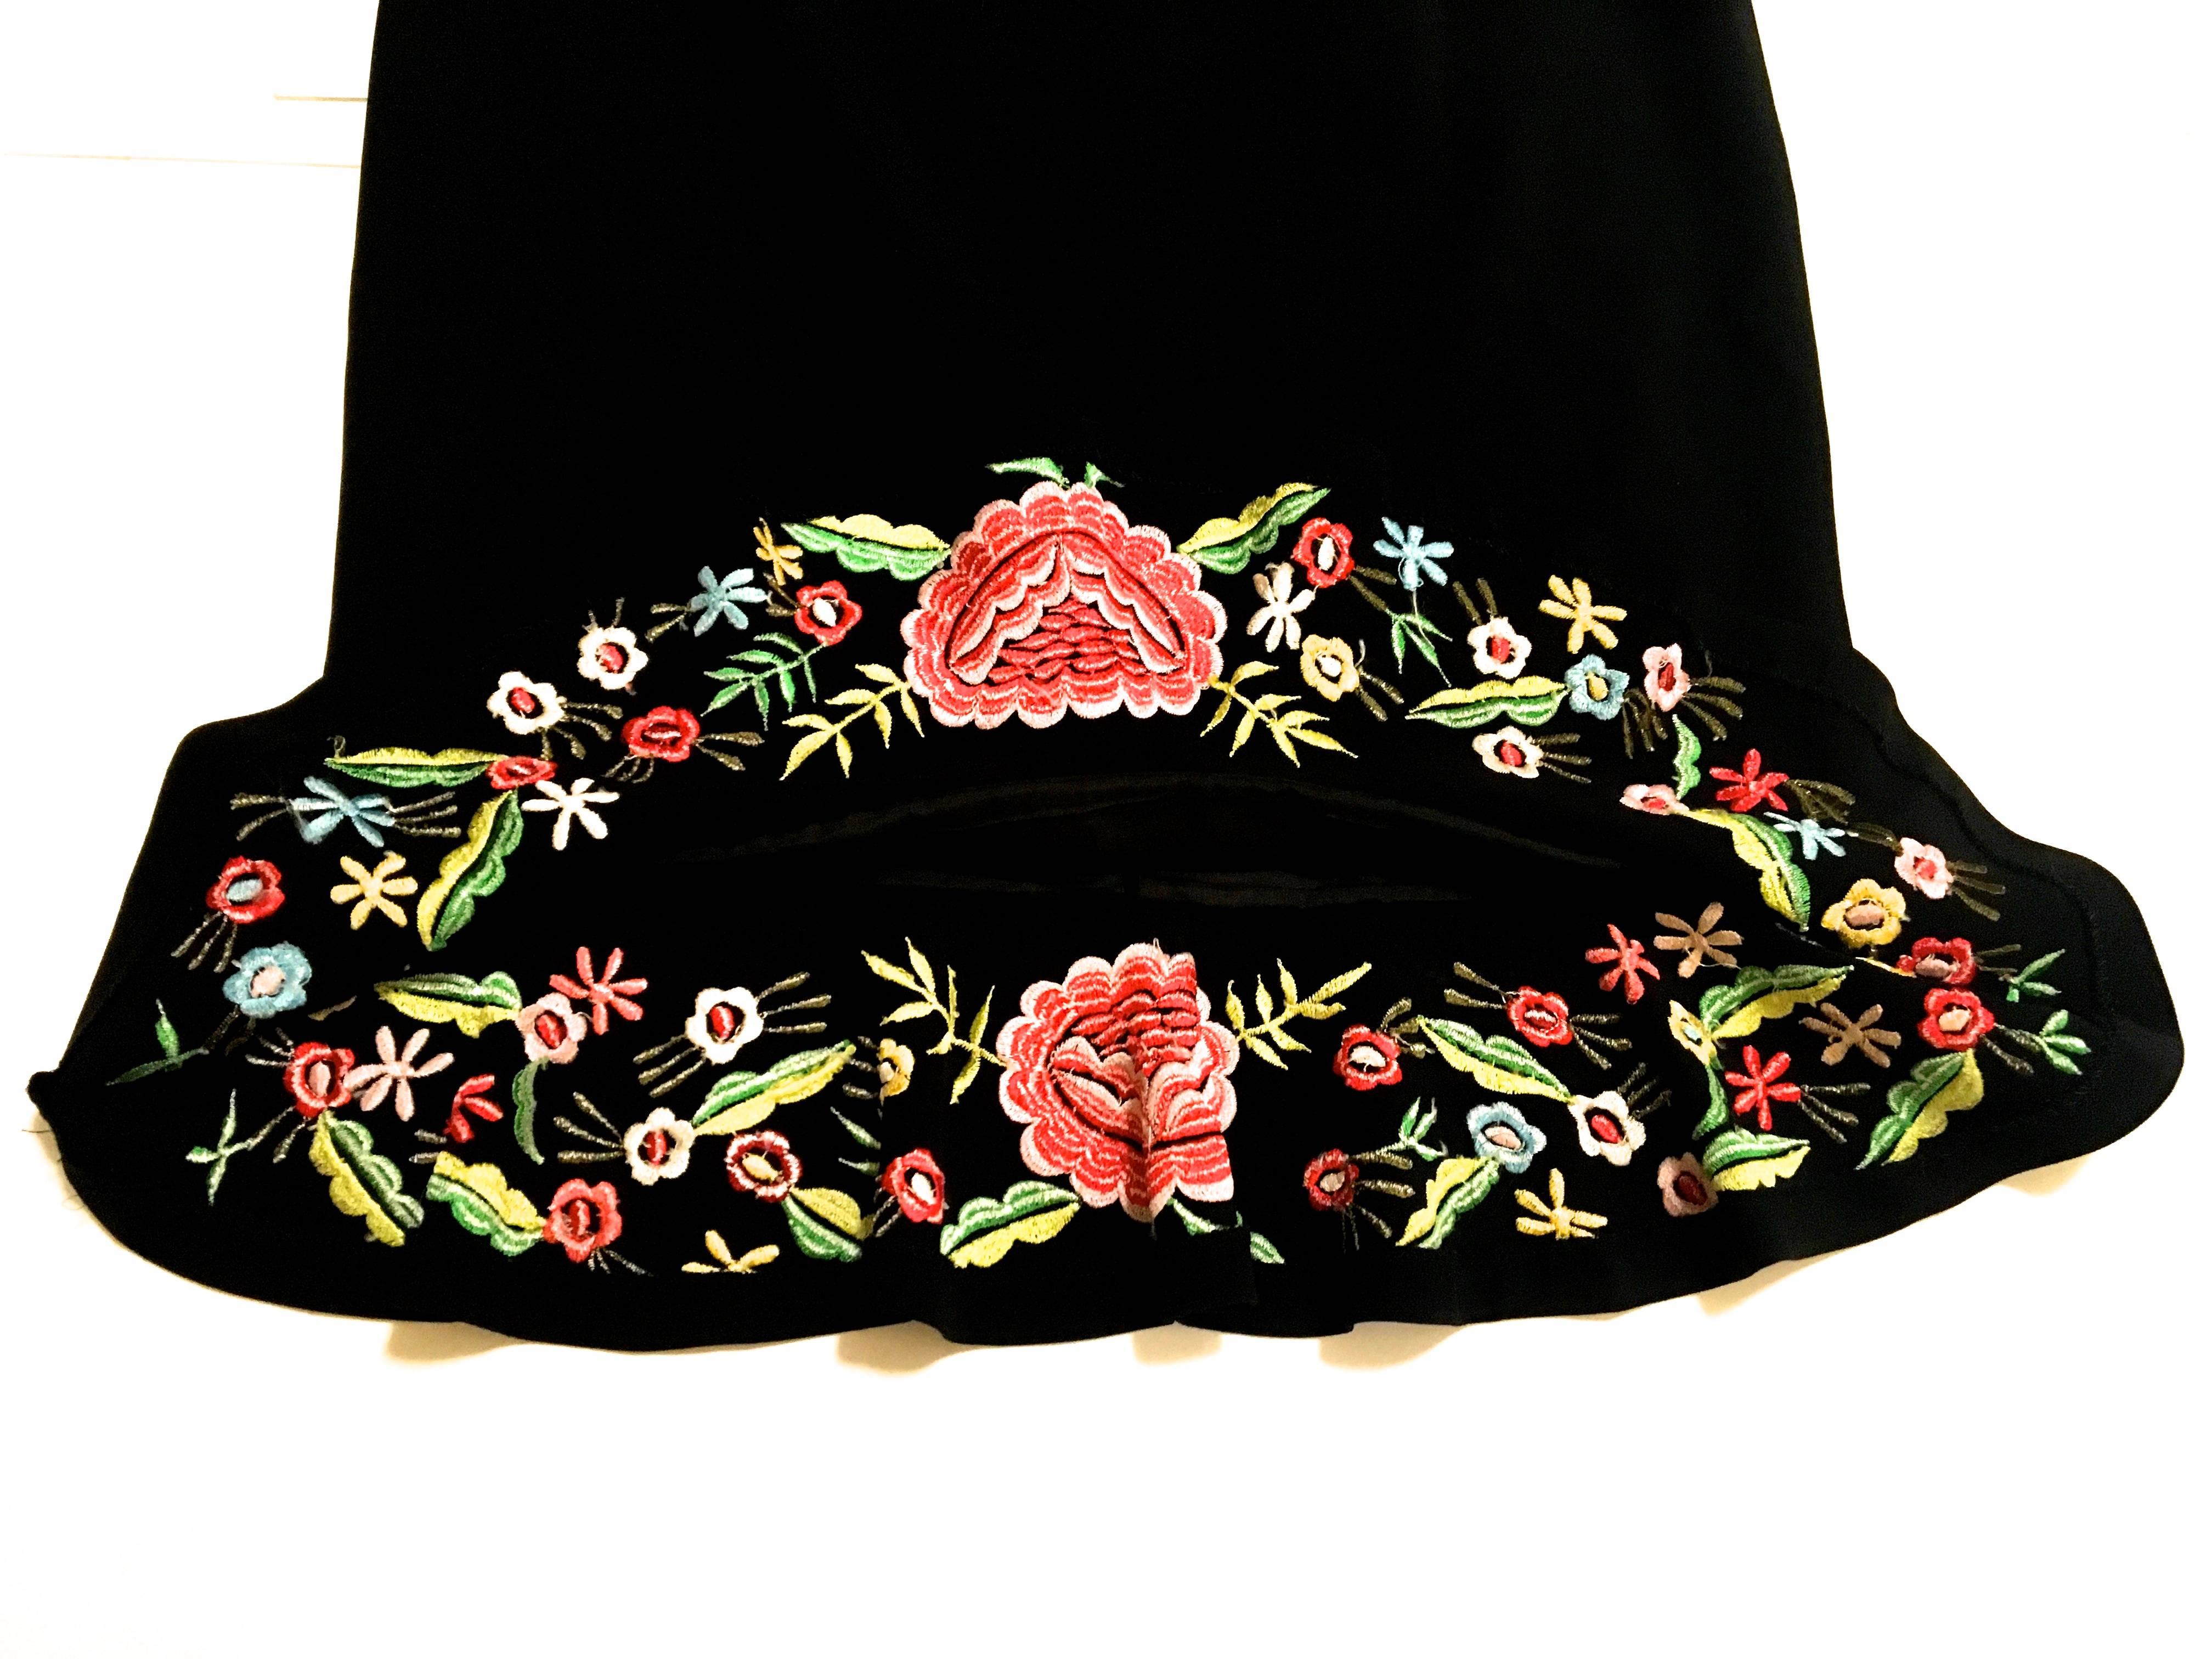 Women's Moschino Skirt - Like New - Black  Skirt with Floral Trim For Sale